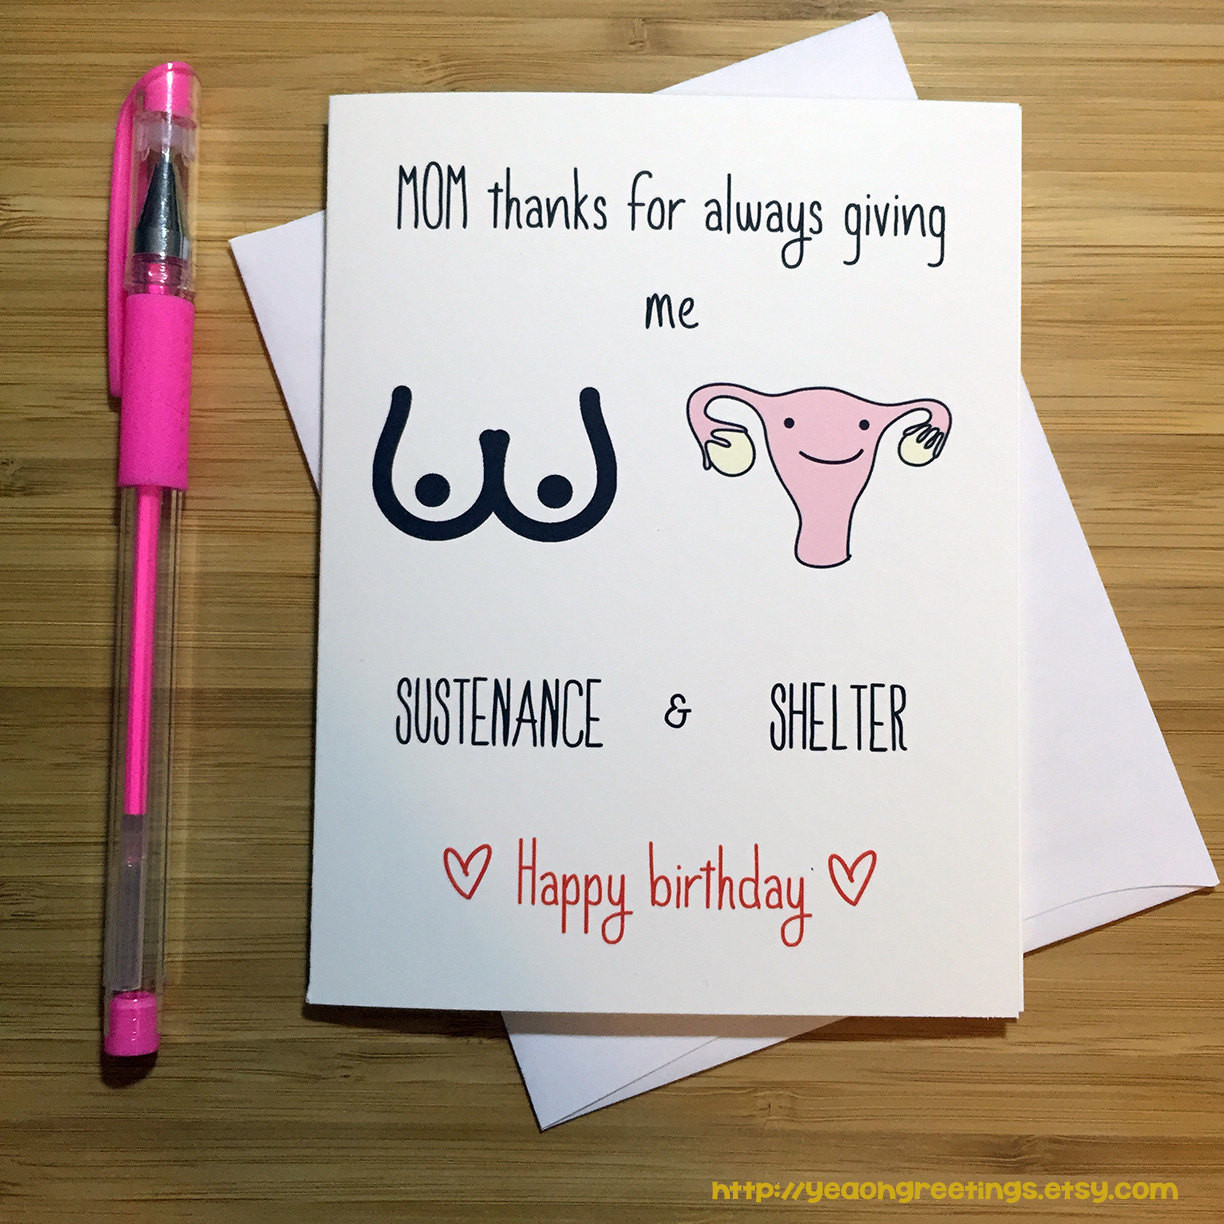 Funny Birthday Cards For Mom
 Happy Birthday Mom Funny Mom Card Inappropriate Card Card